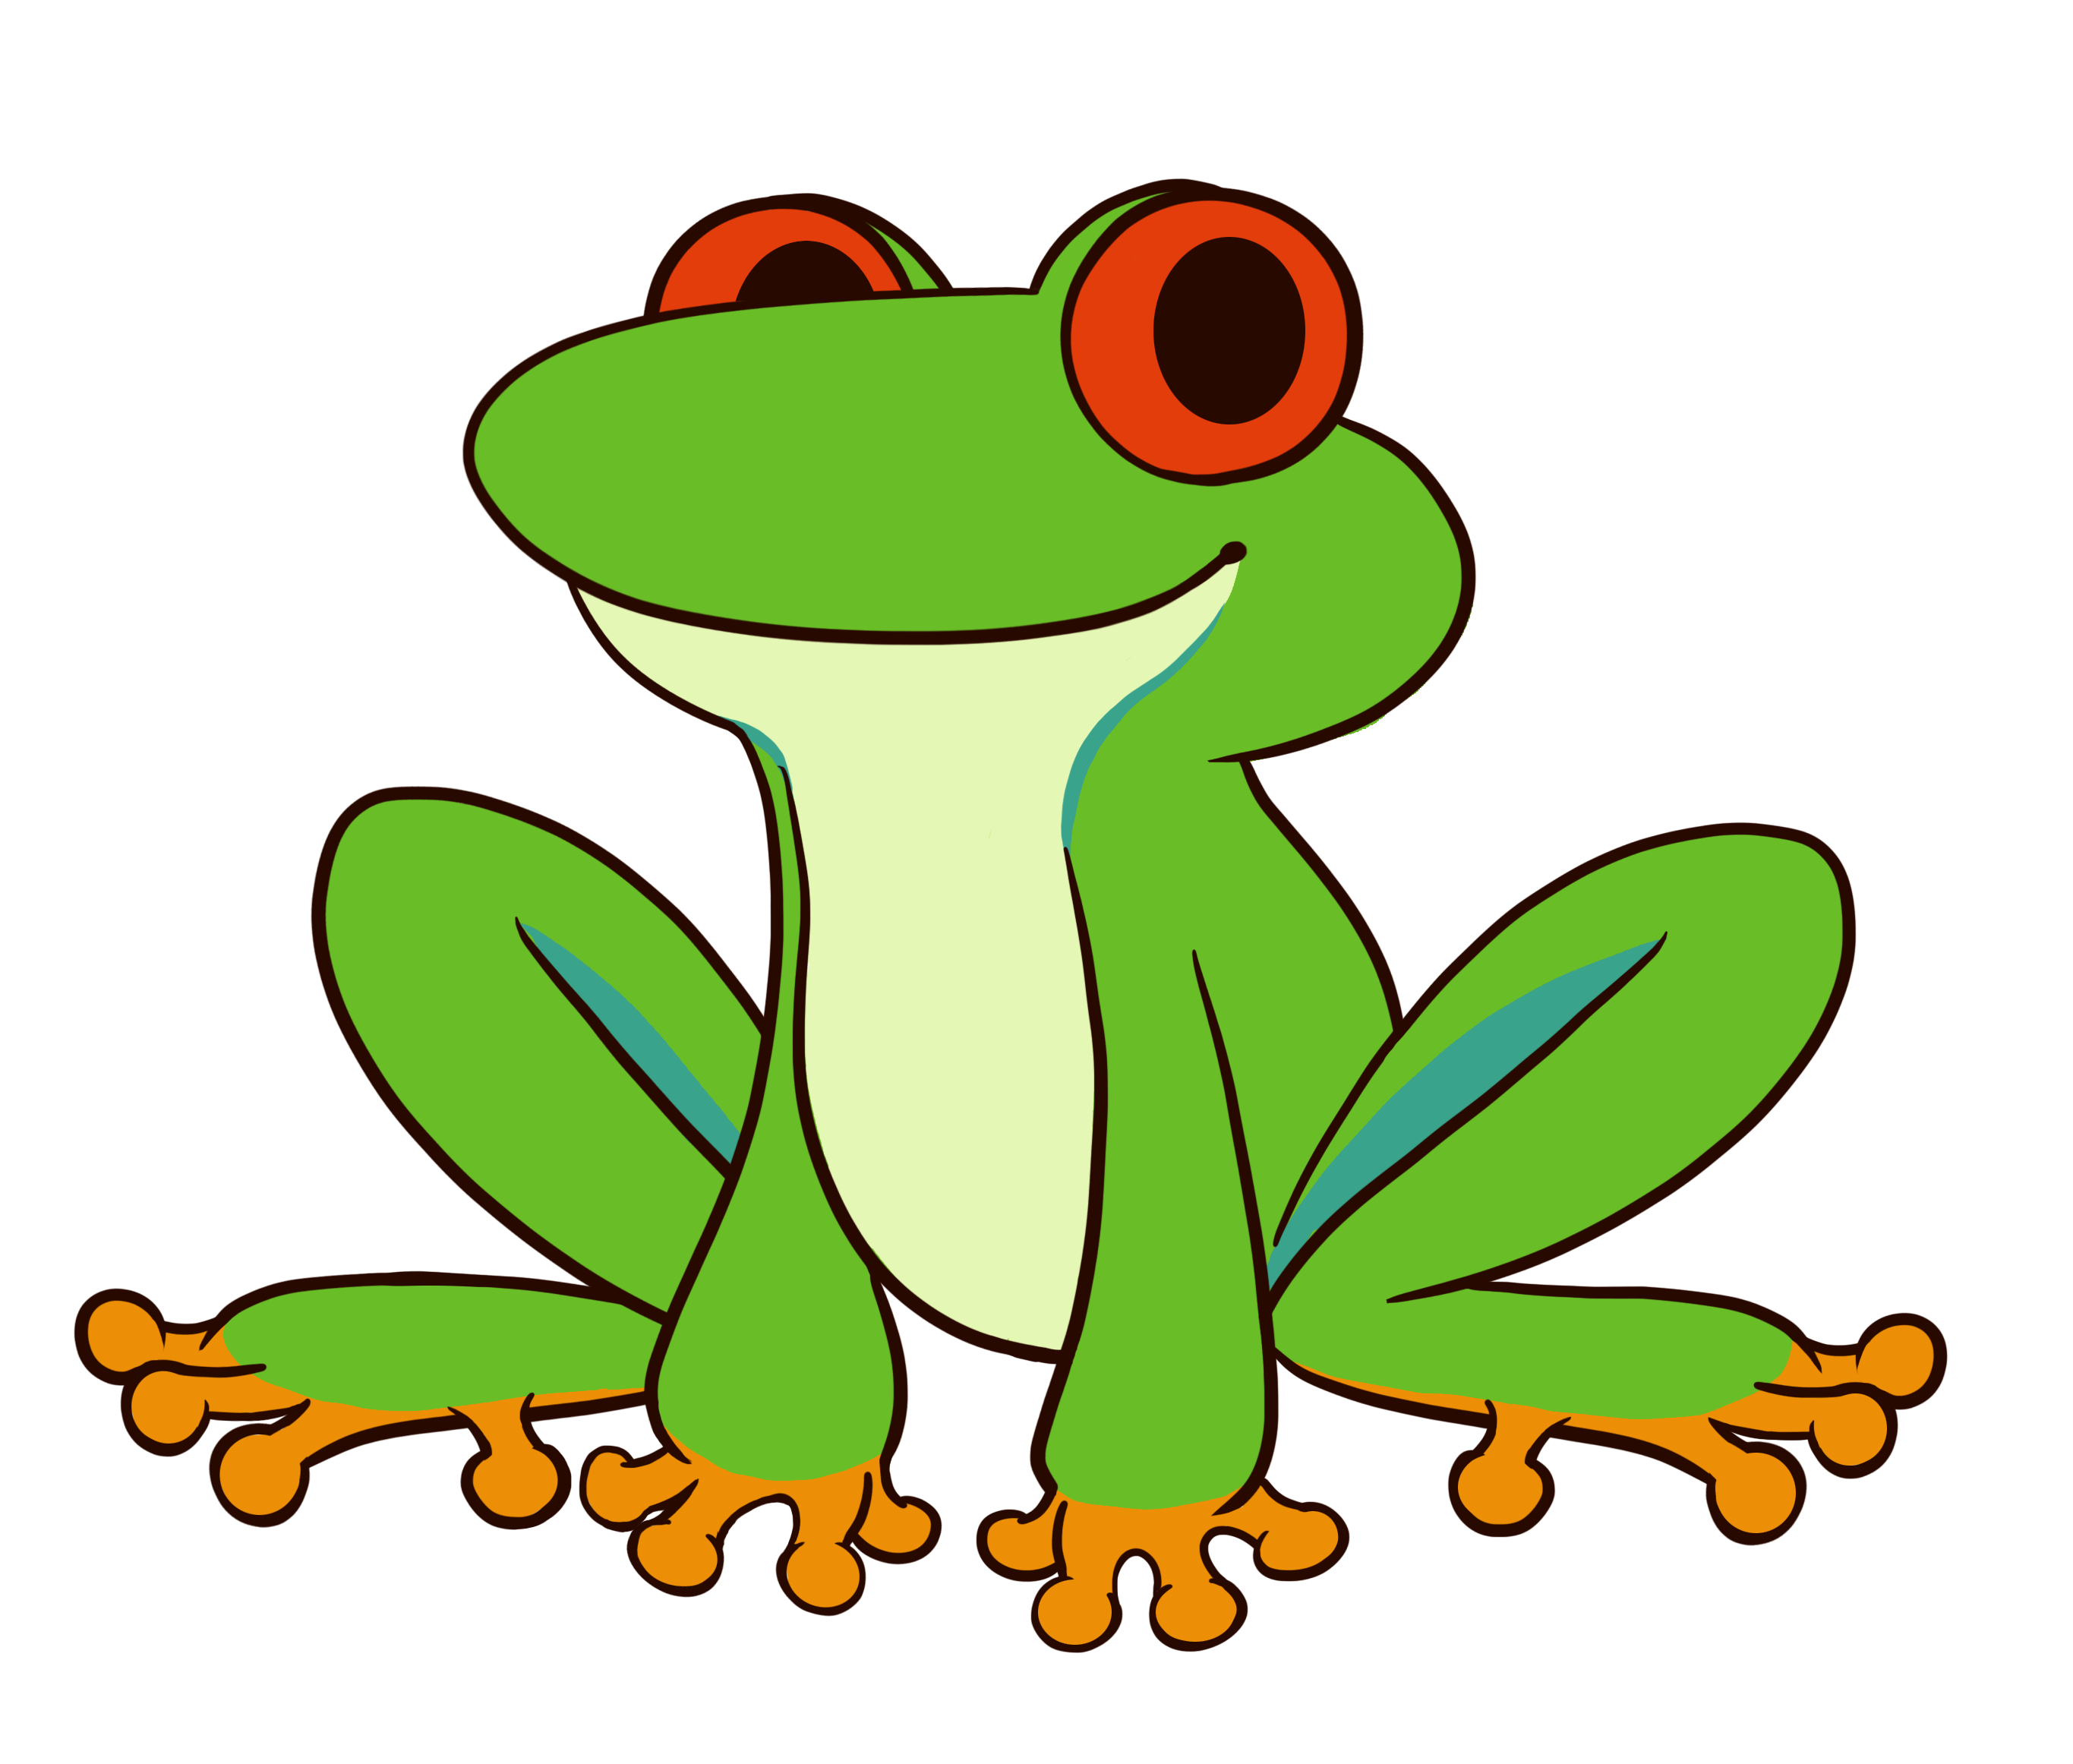 Box of frogs media. Cold clipart frog